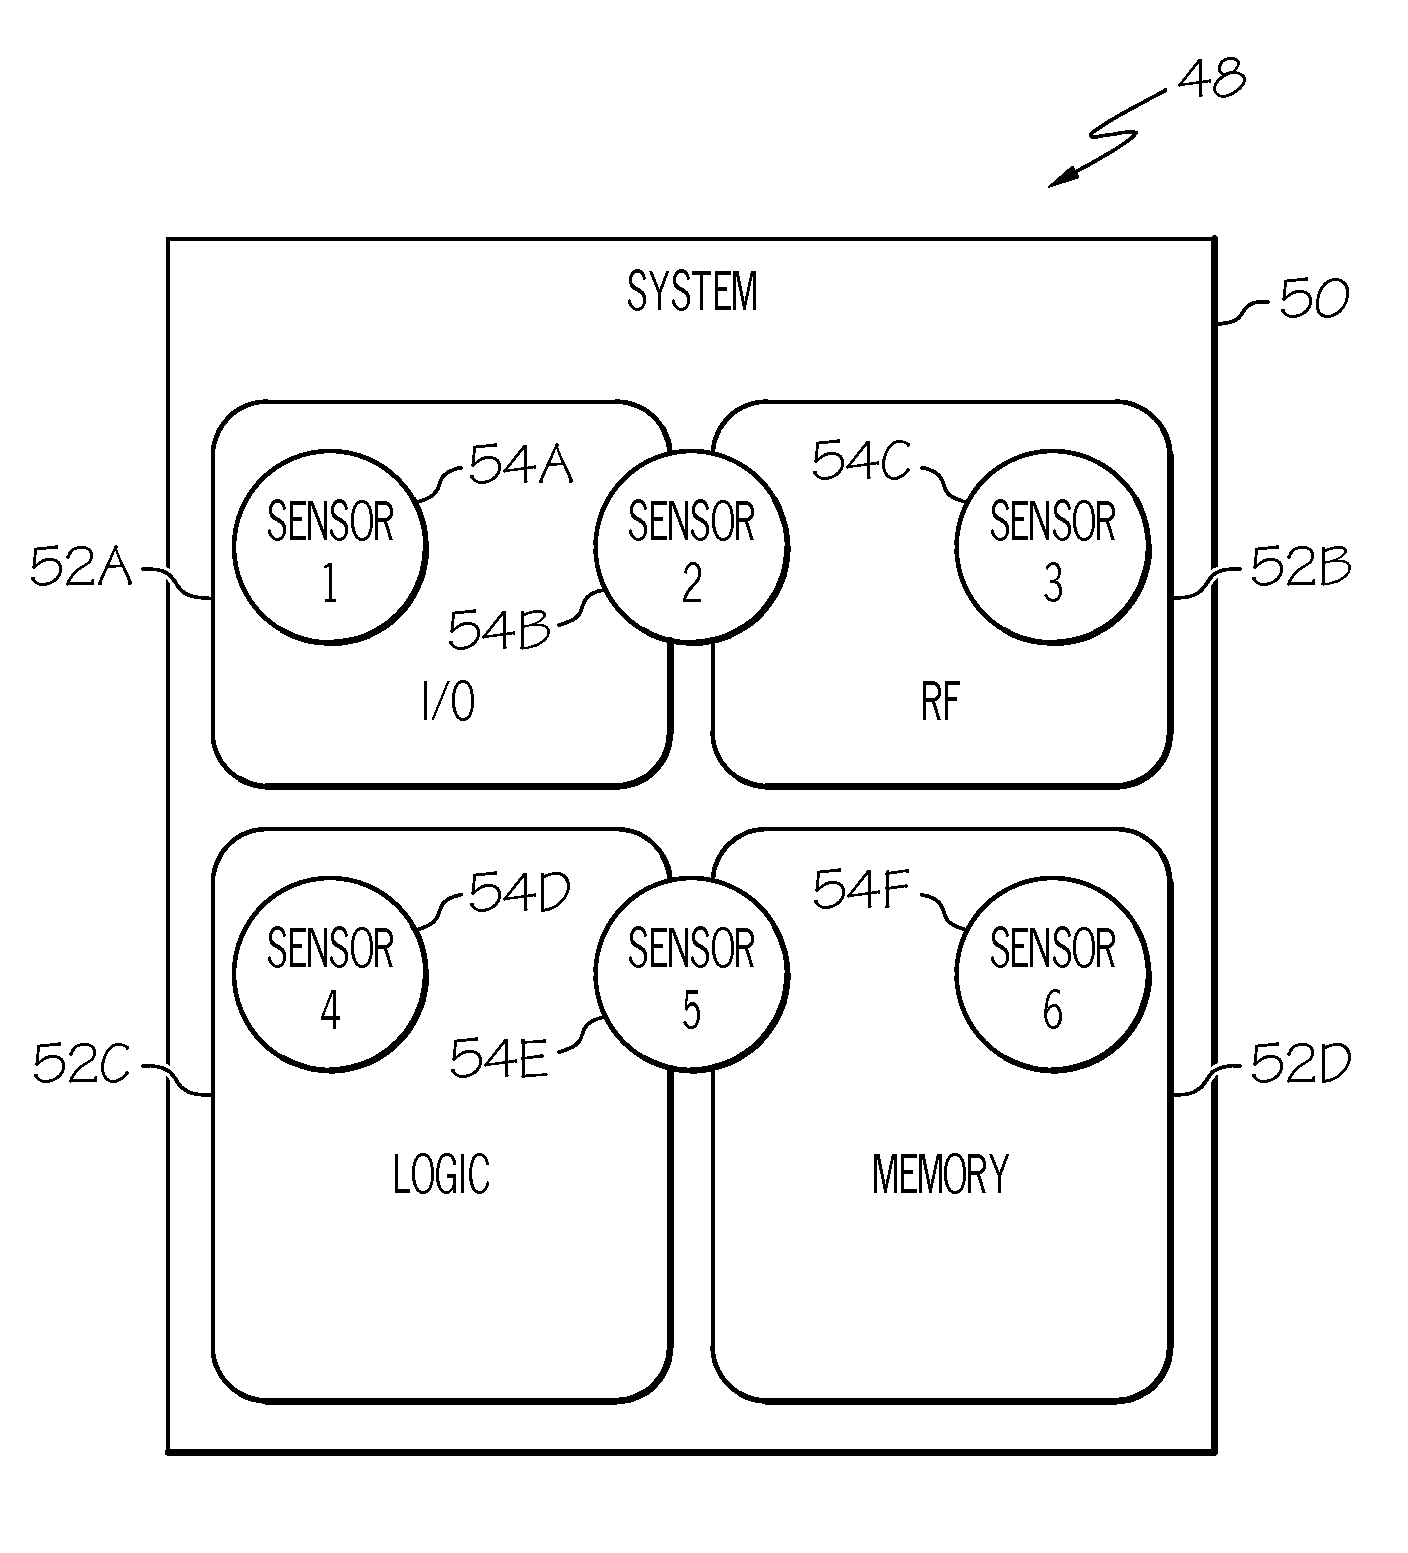 Sensor for semiconductor degradation monitoring and modeling